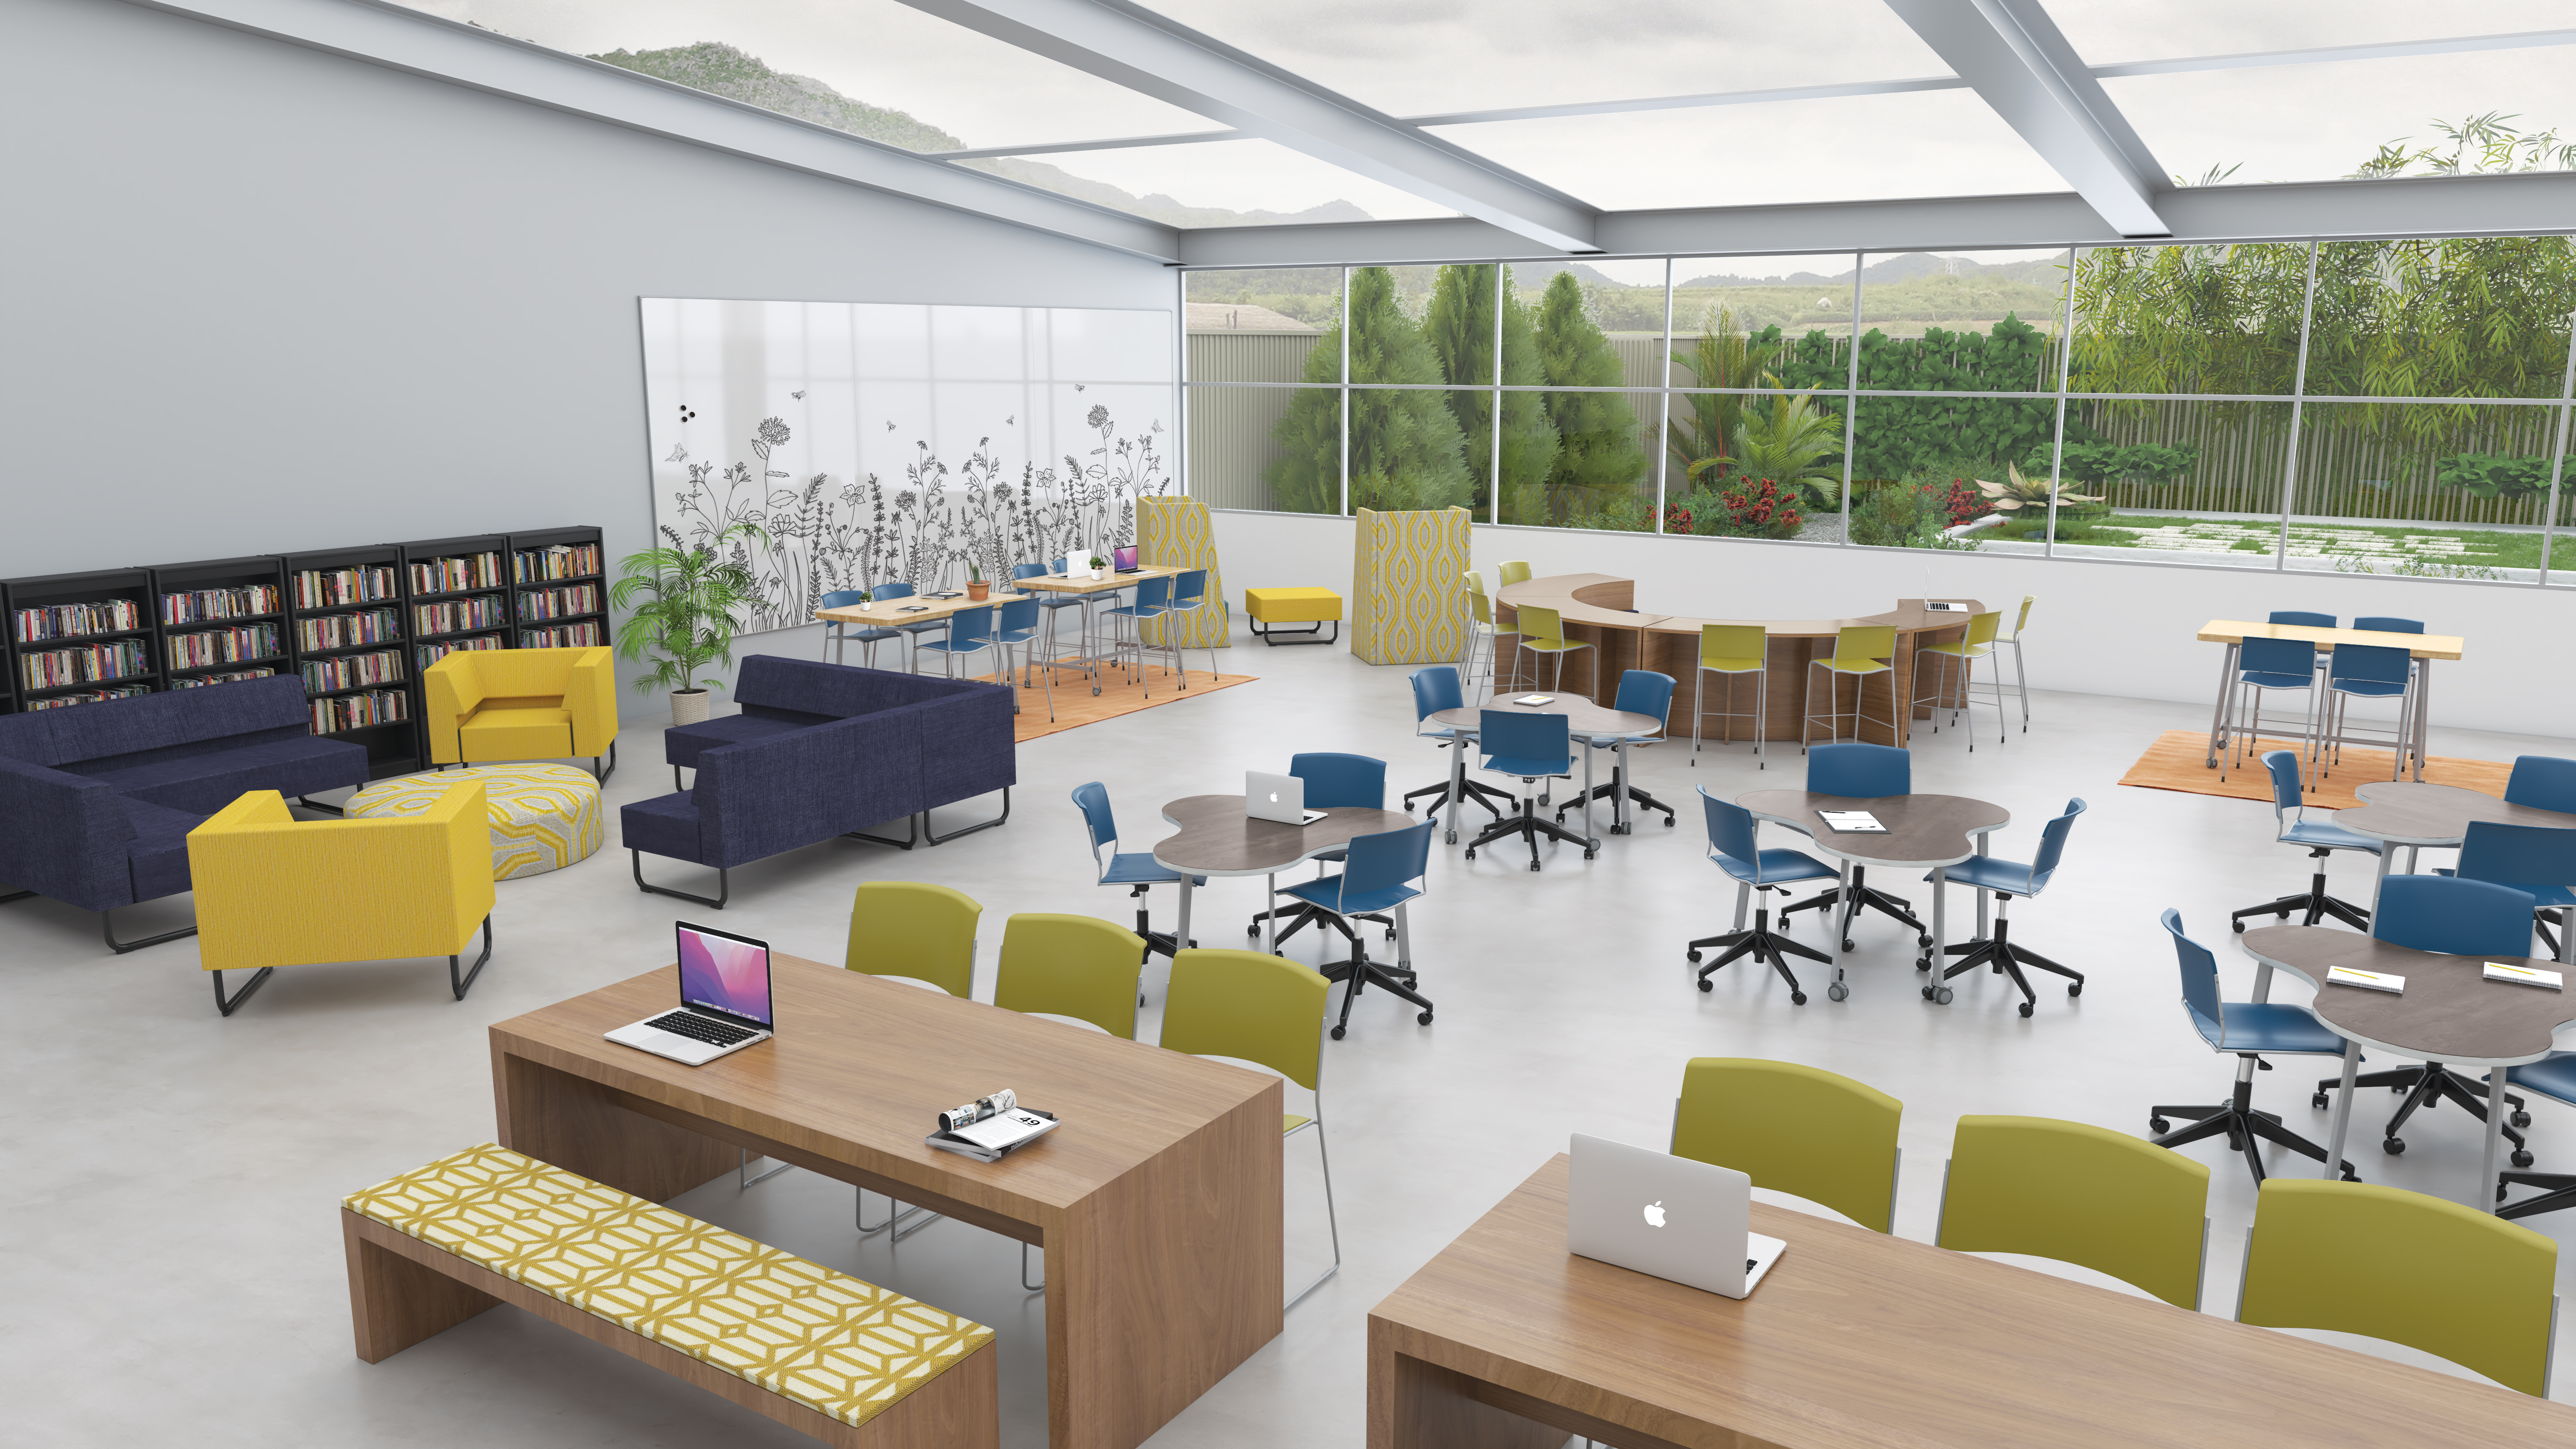 How to Build Career and Technical Education (CTE) Environments with Akt Soft Seating and Tables